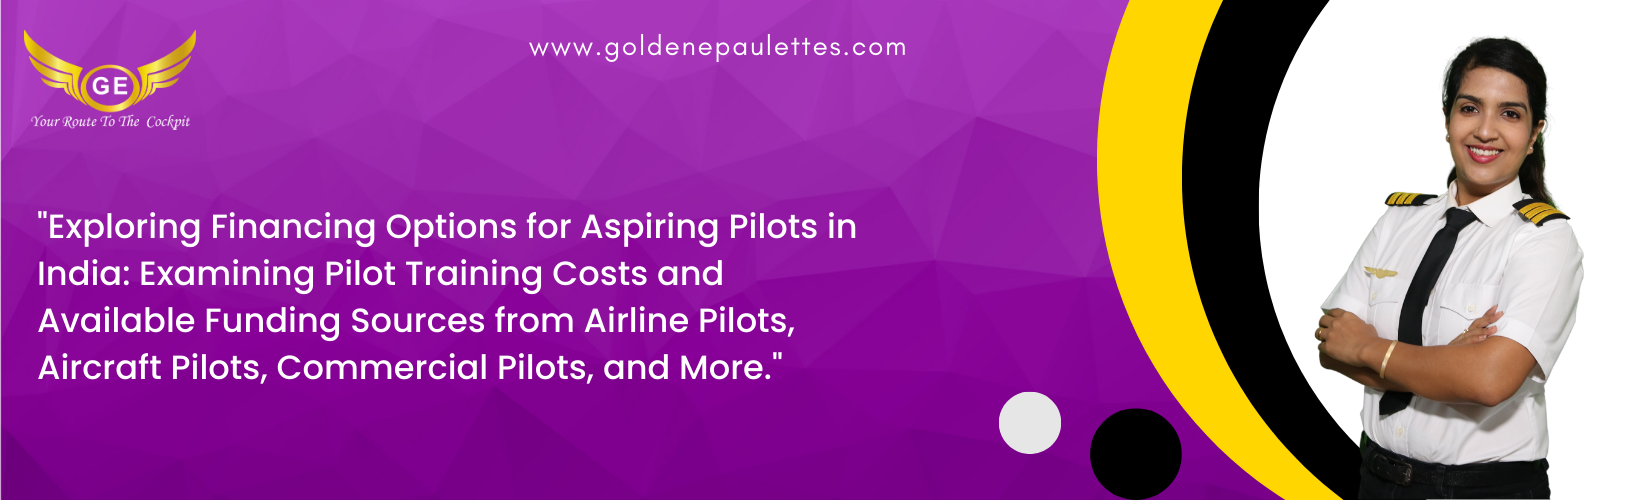 Financing Options for Aspiring Pilots in India